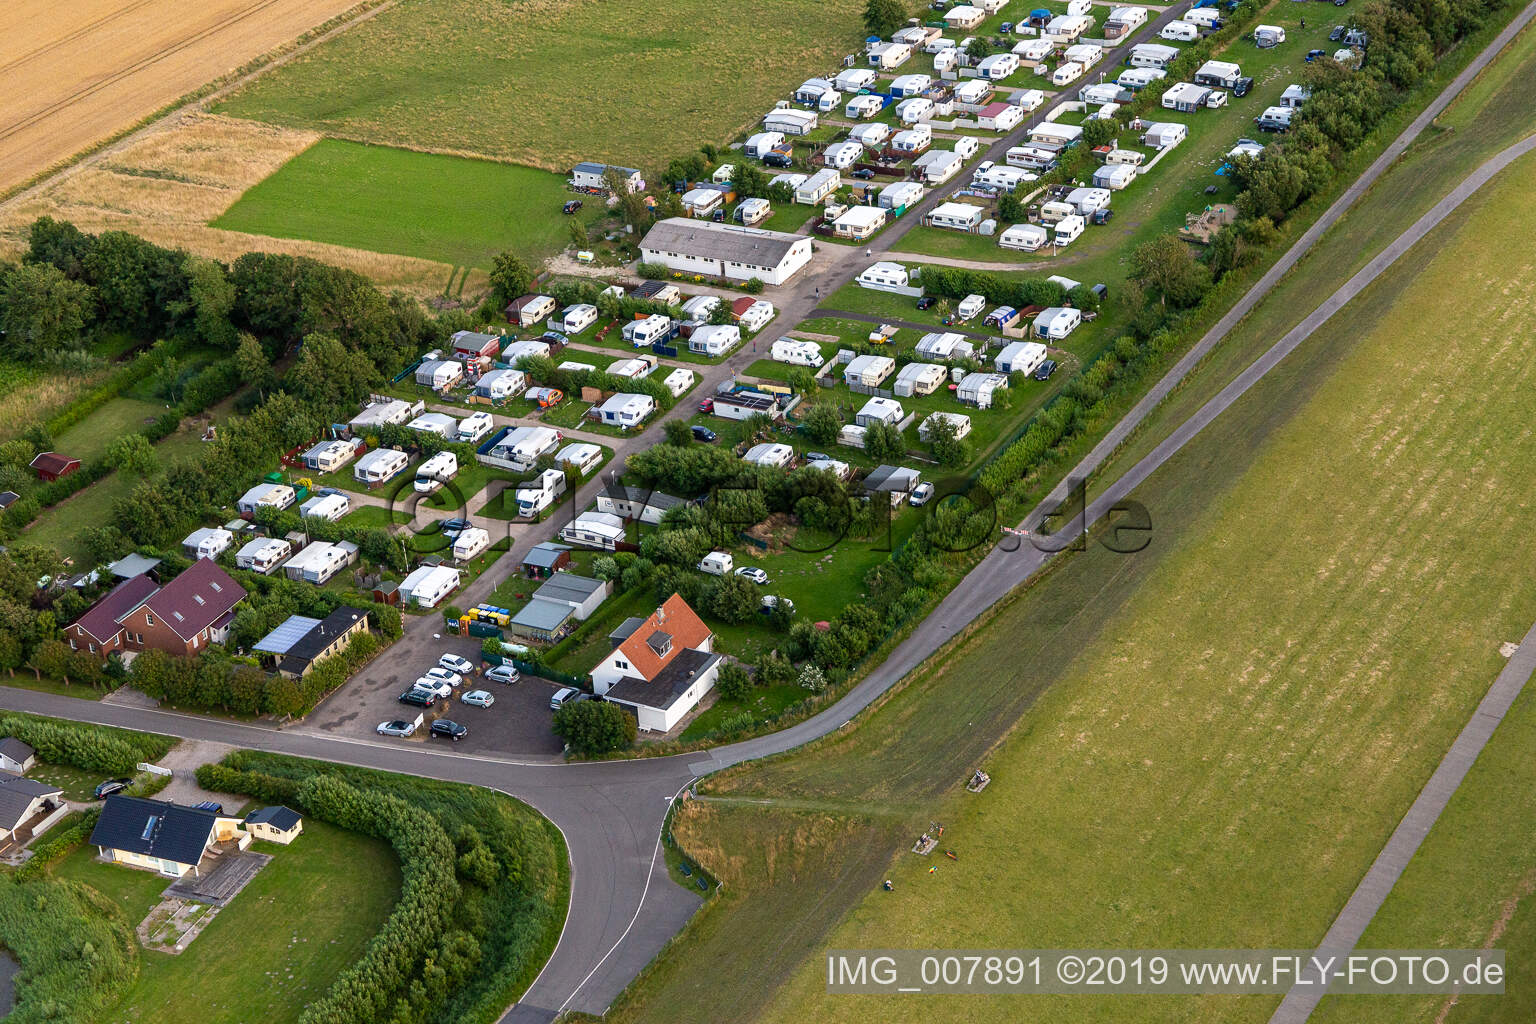 Holiday home development and camping Wesselburenerkoog in Wesselburenerkoog in the state Schleswig Holstein, Germany out of the air